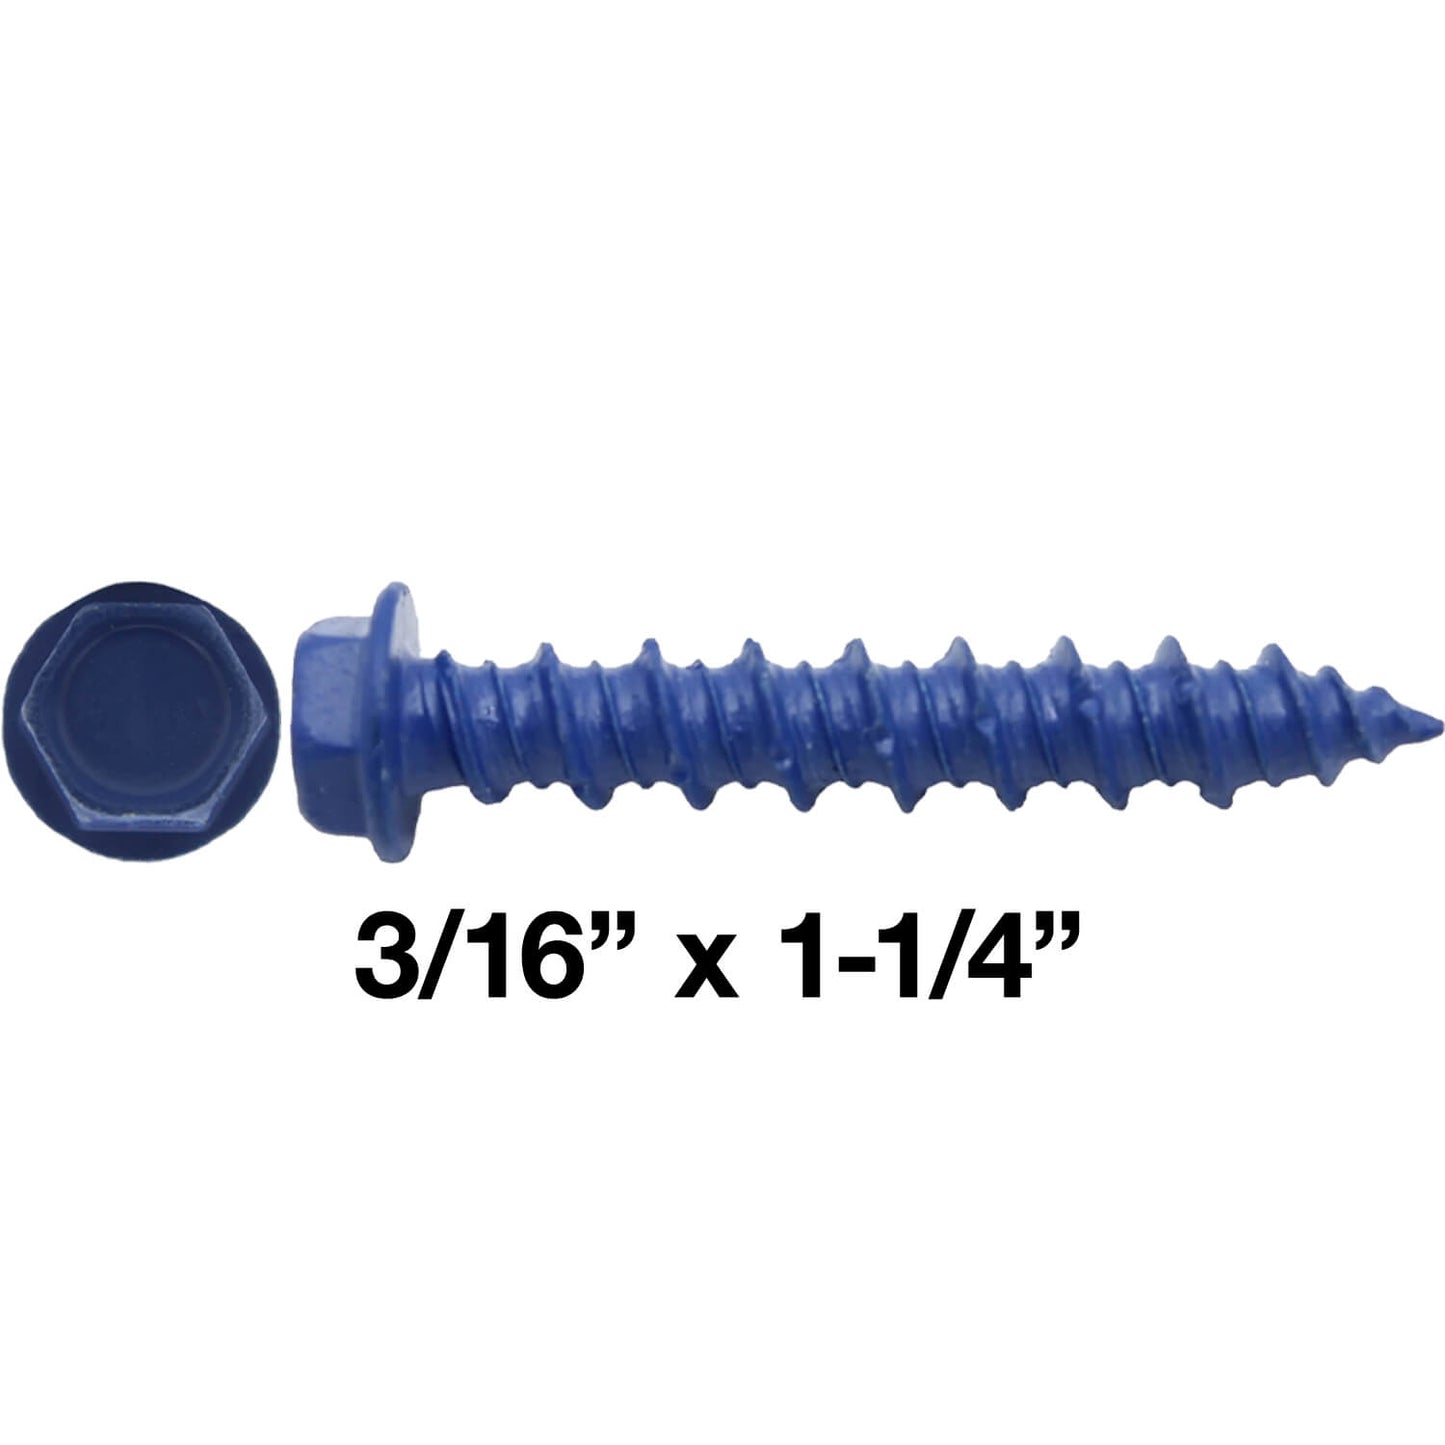 Blue Carbon Steel Hex Head Concrete Anchor Screws. Carbon Steel Hardened - Interior & Exterior Coated Rust and Corrosion Resistant Screws